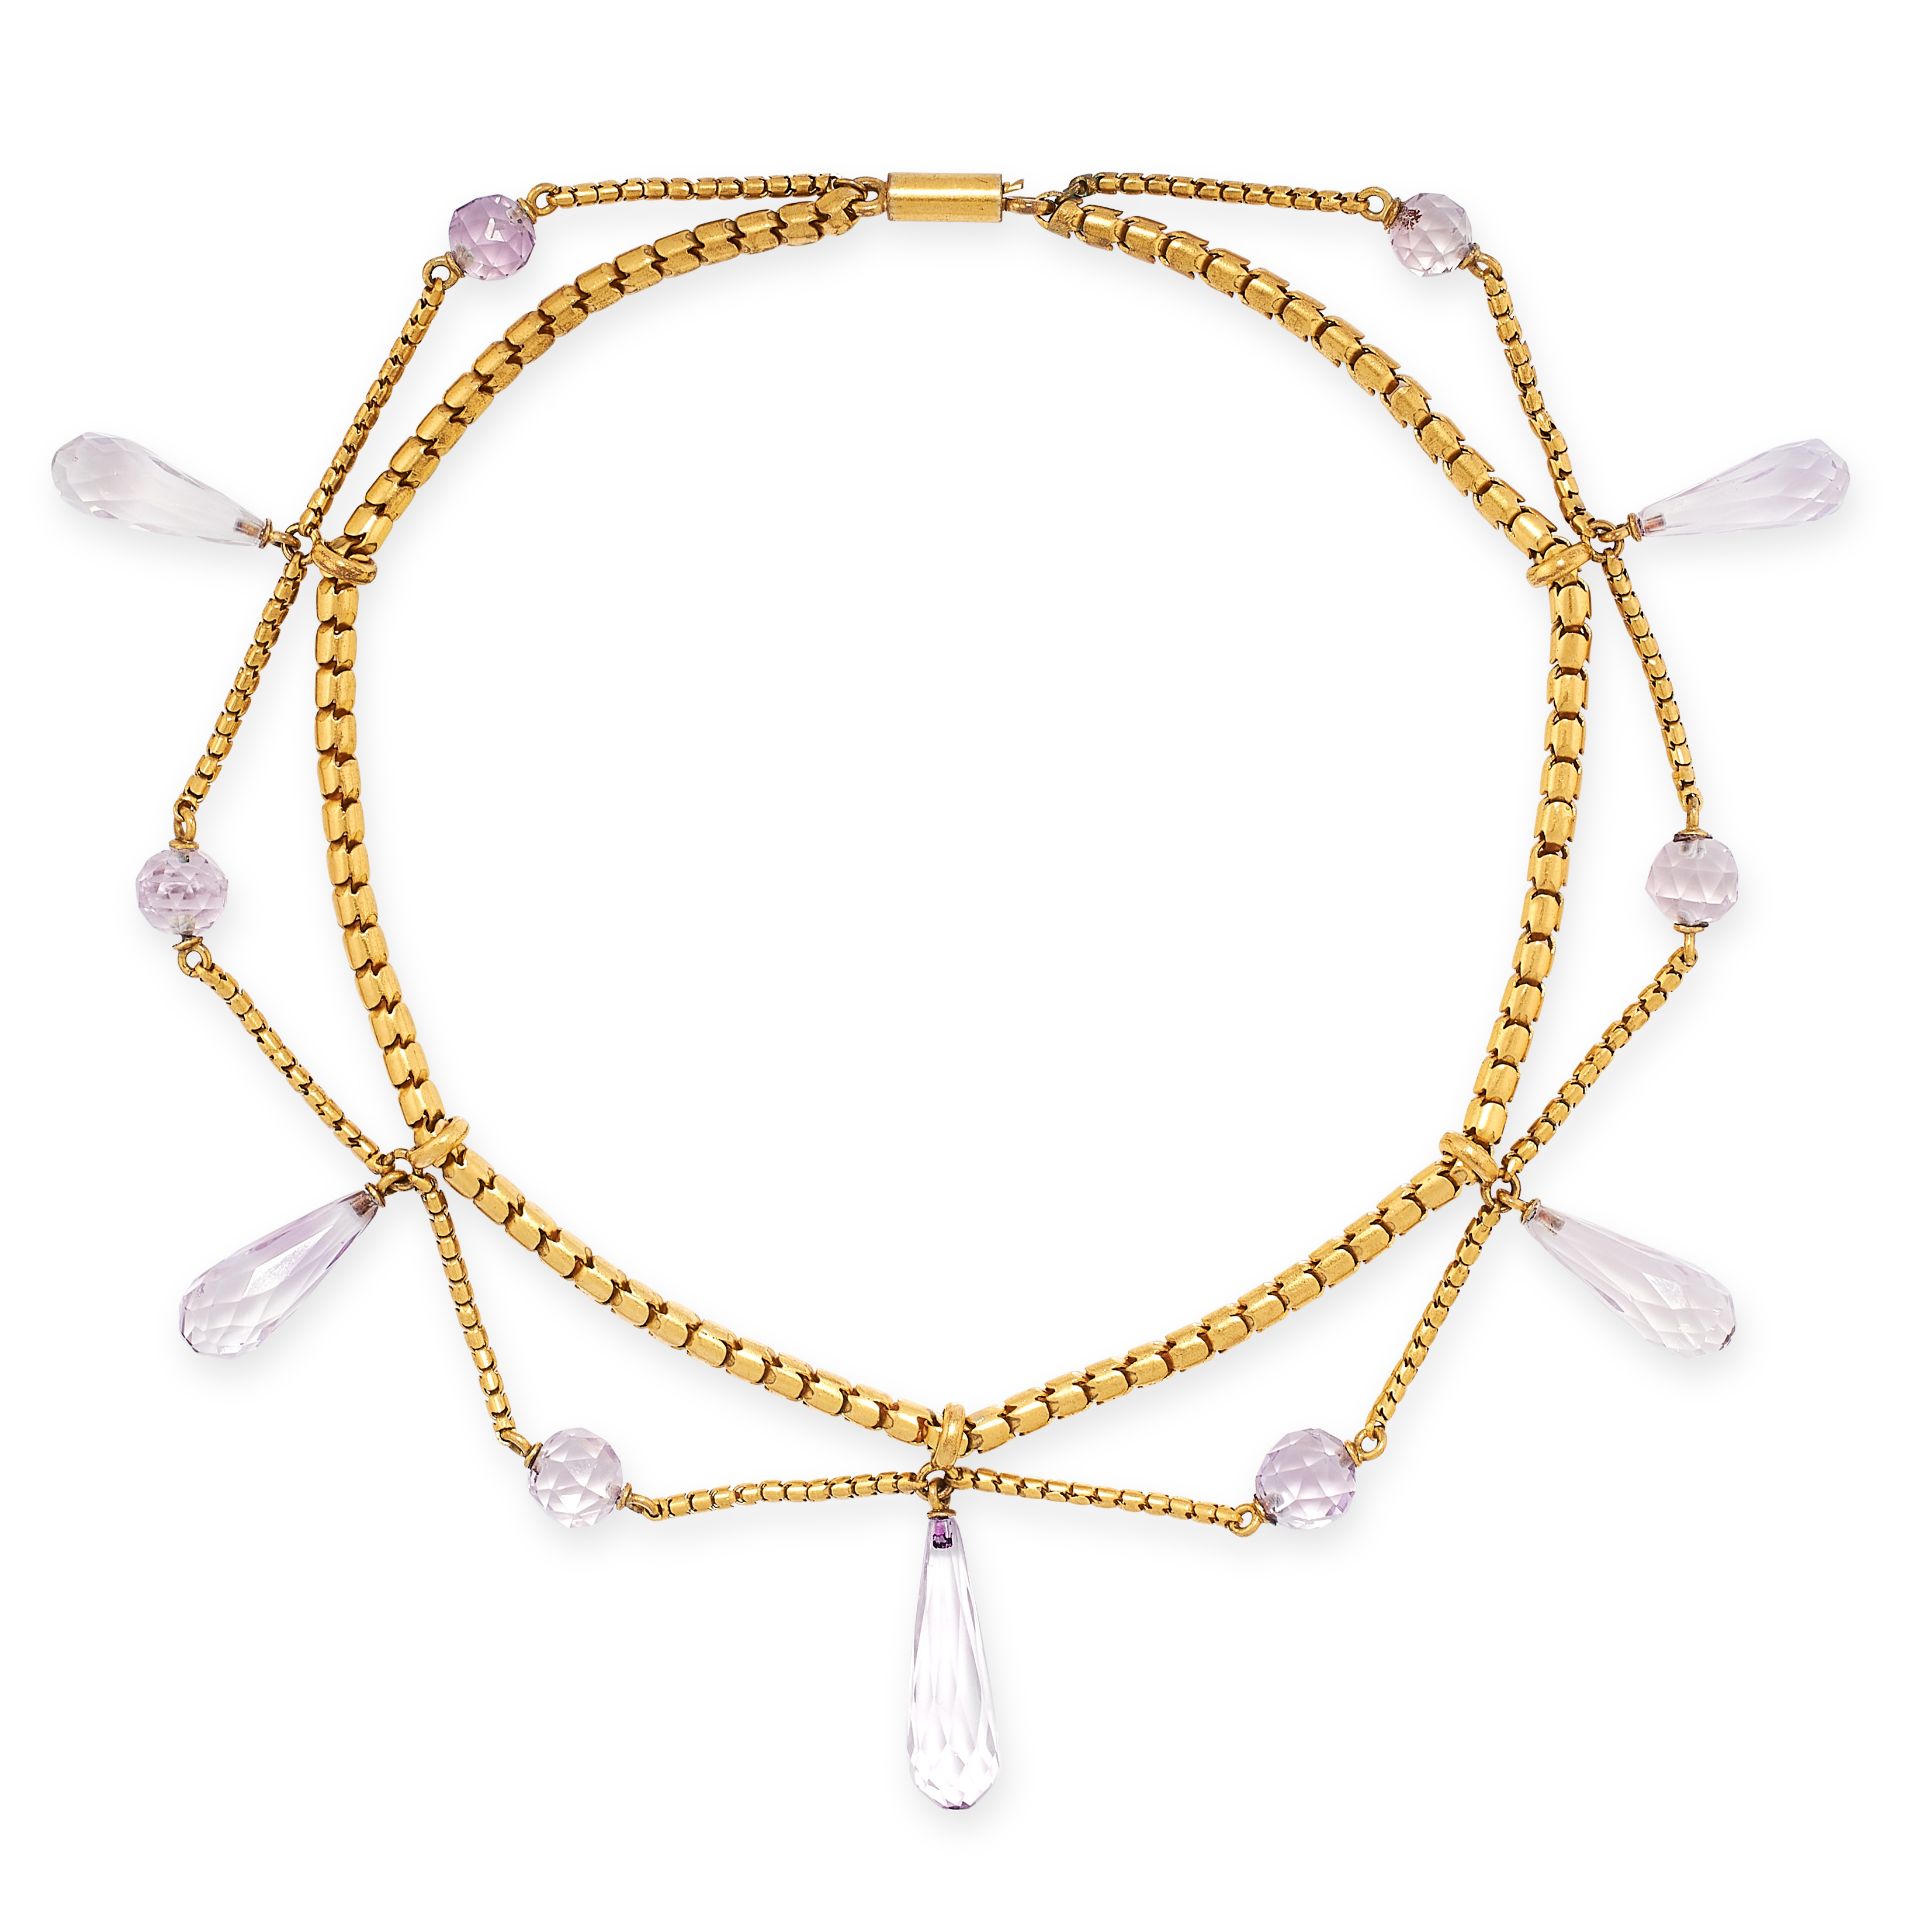 AN ANTIQUE AMETHYST NECKLACE, LATE 19TH CENTURY in yellow gold, the chain suspending five